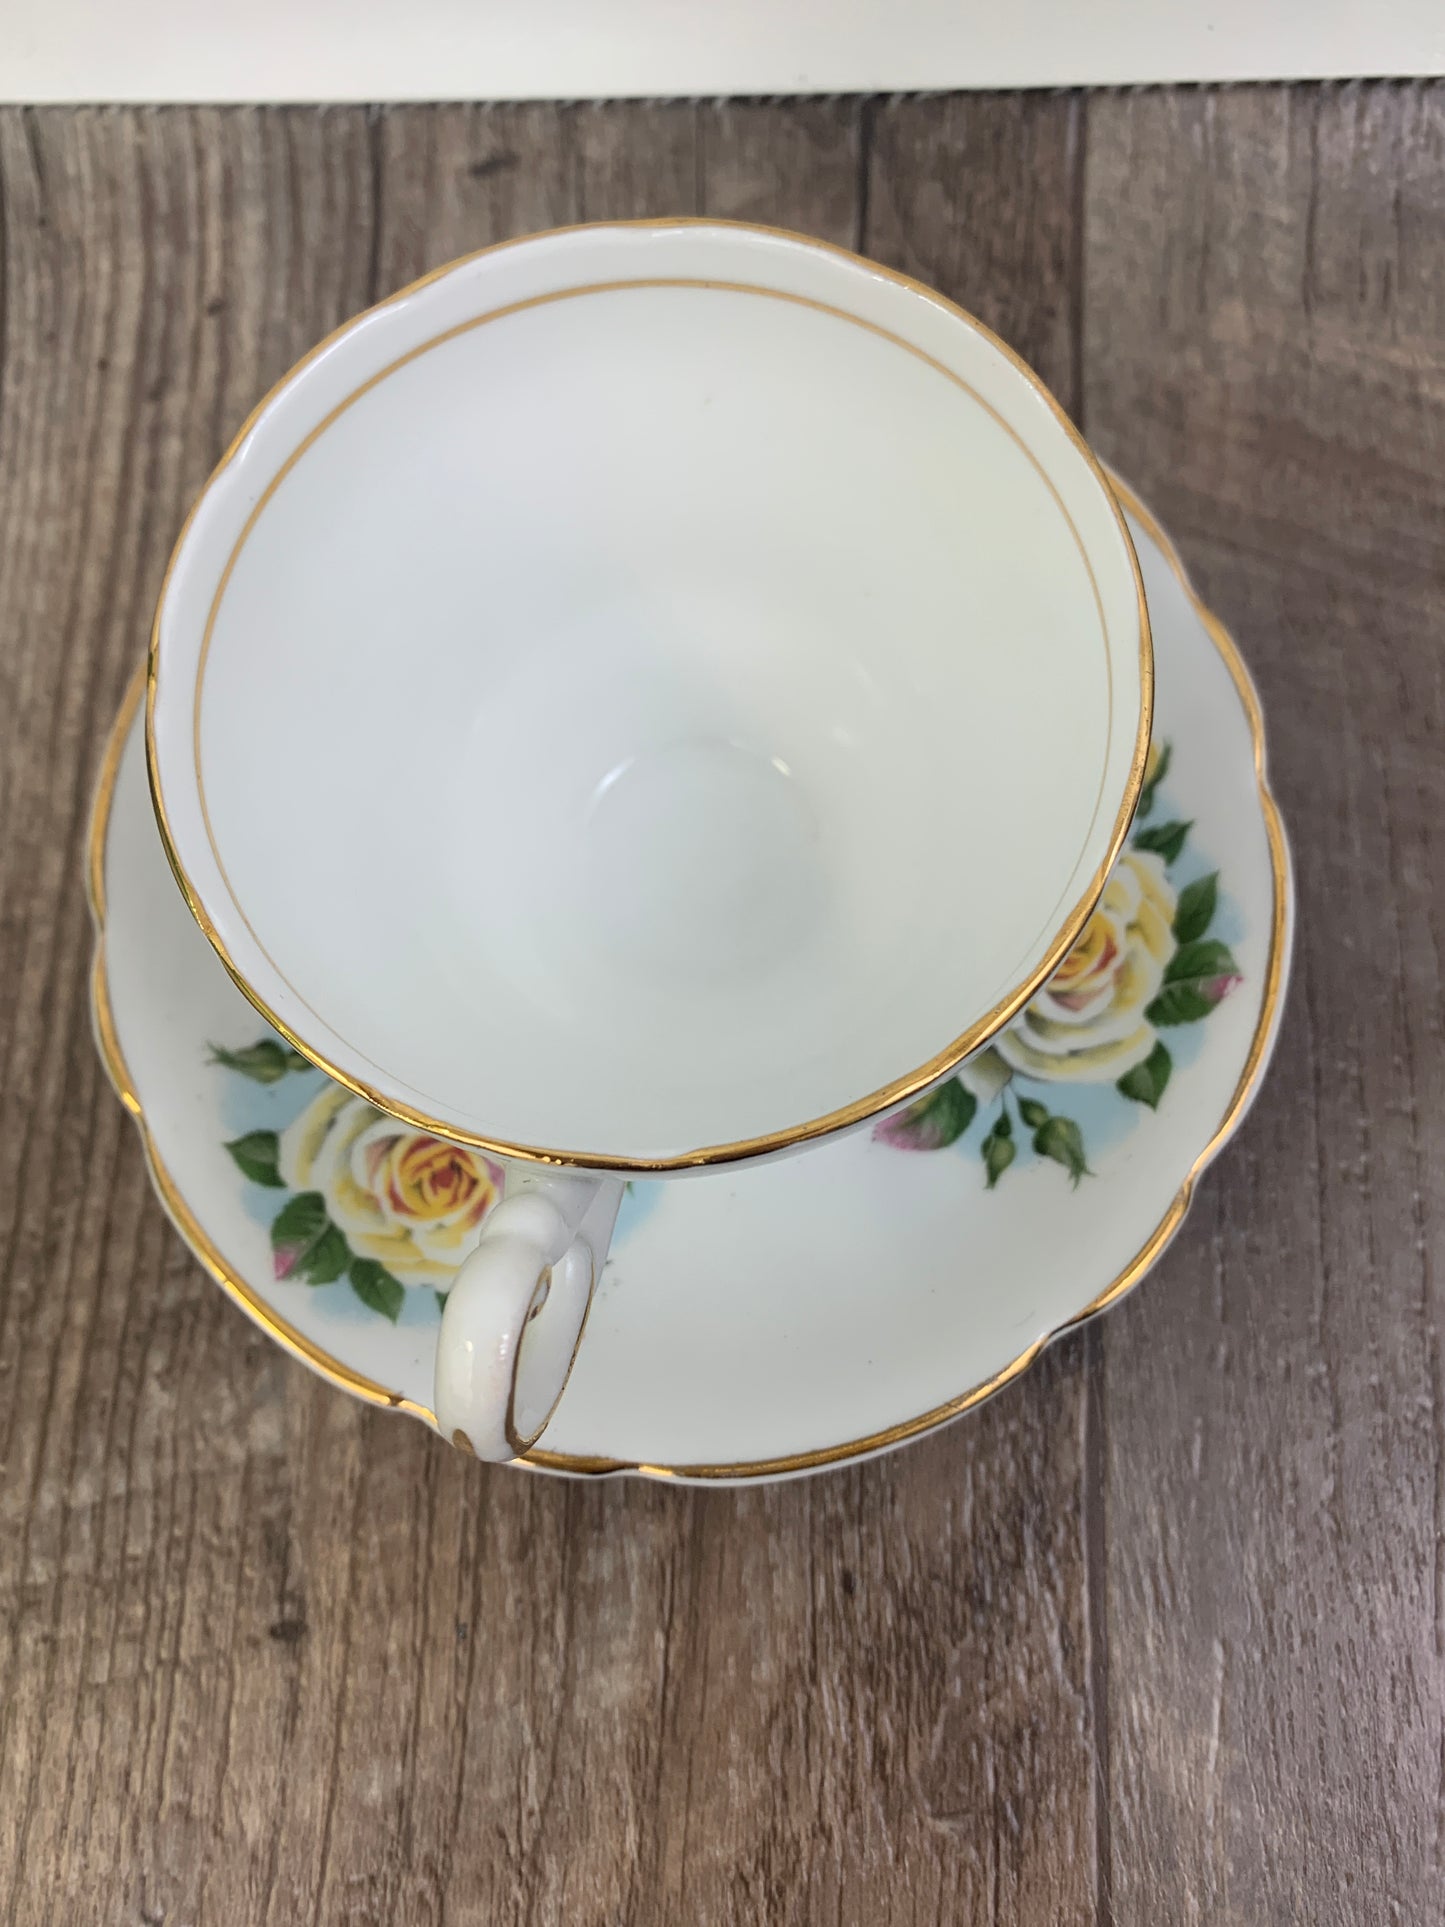 Yellow Rose Vintage Teacup and Saucer by Regency China Vintage Gifts Yellow Floral